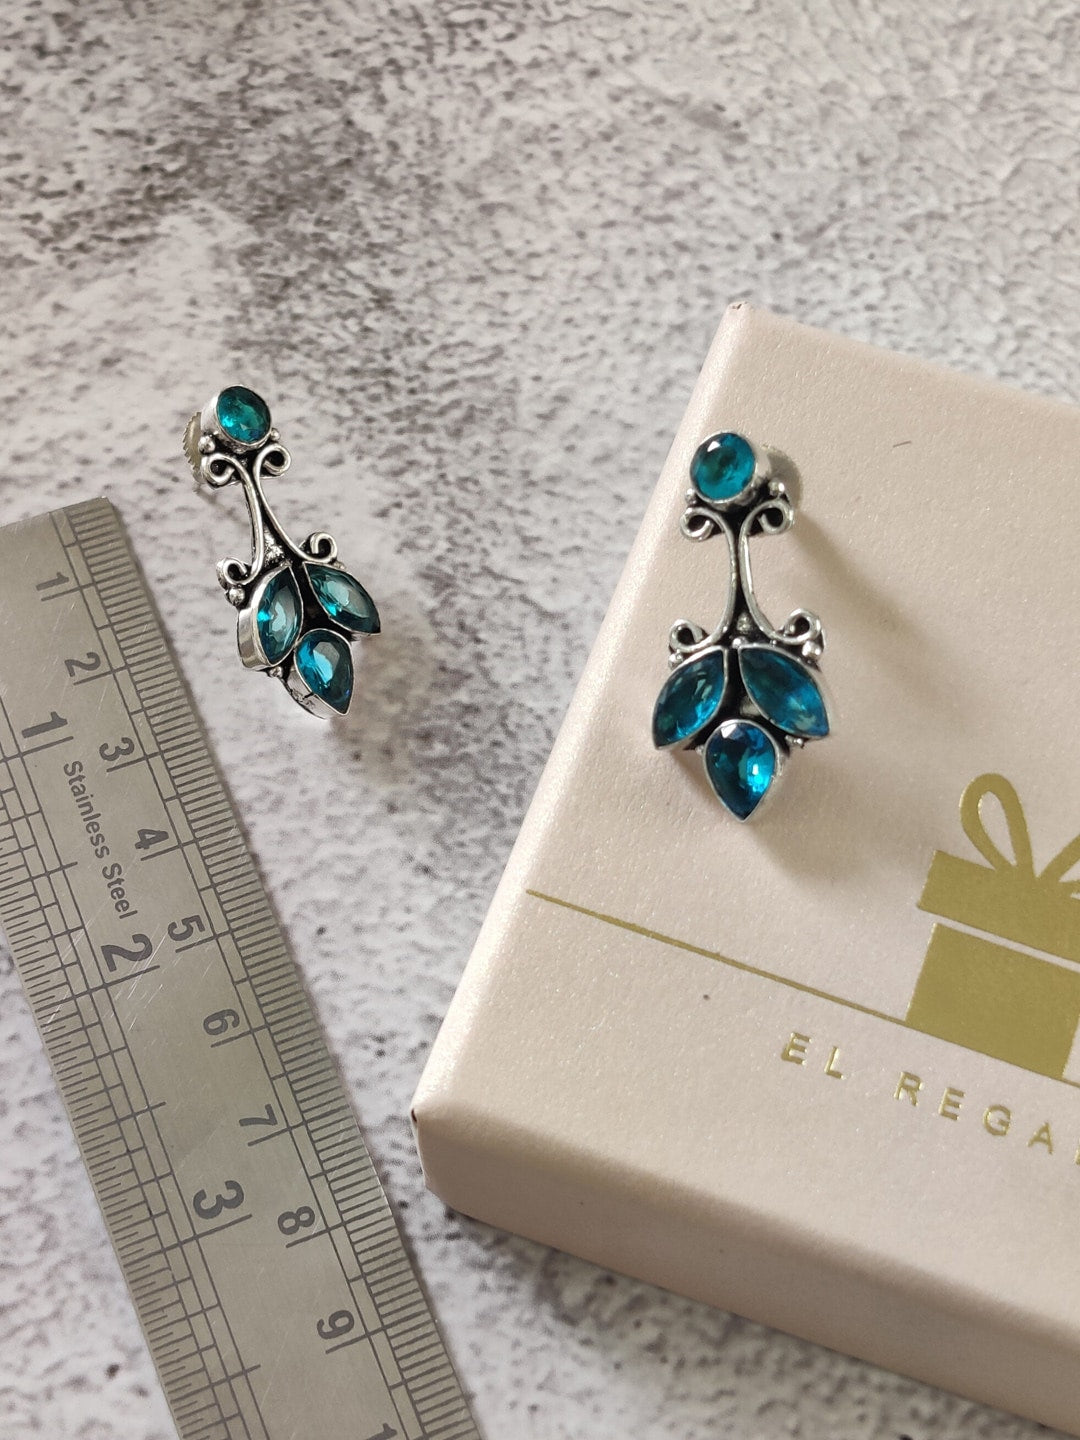 EL REGALO Blue Floral Studs Earrings - for Women and Girls
Style ID: 16851566